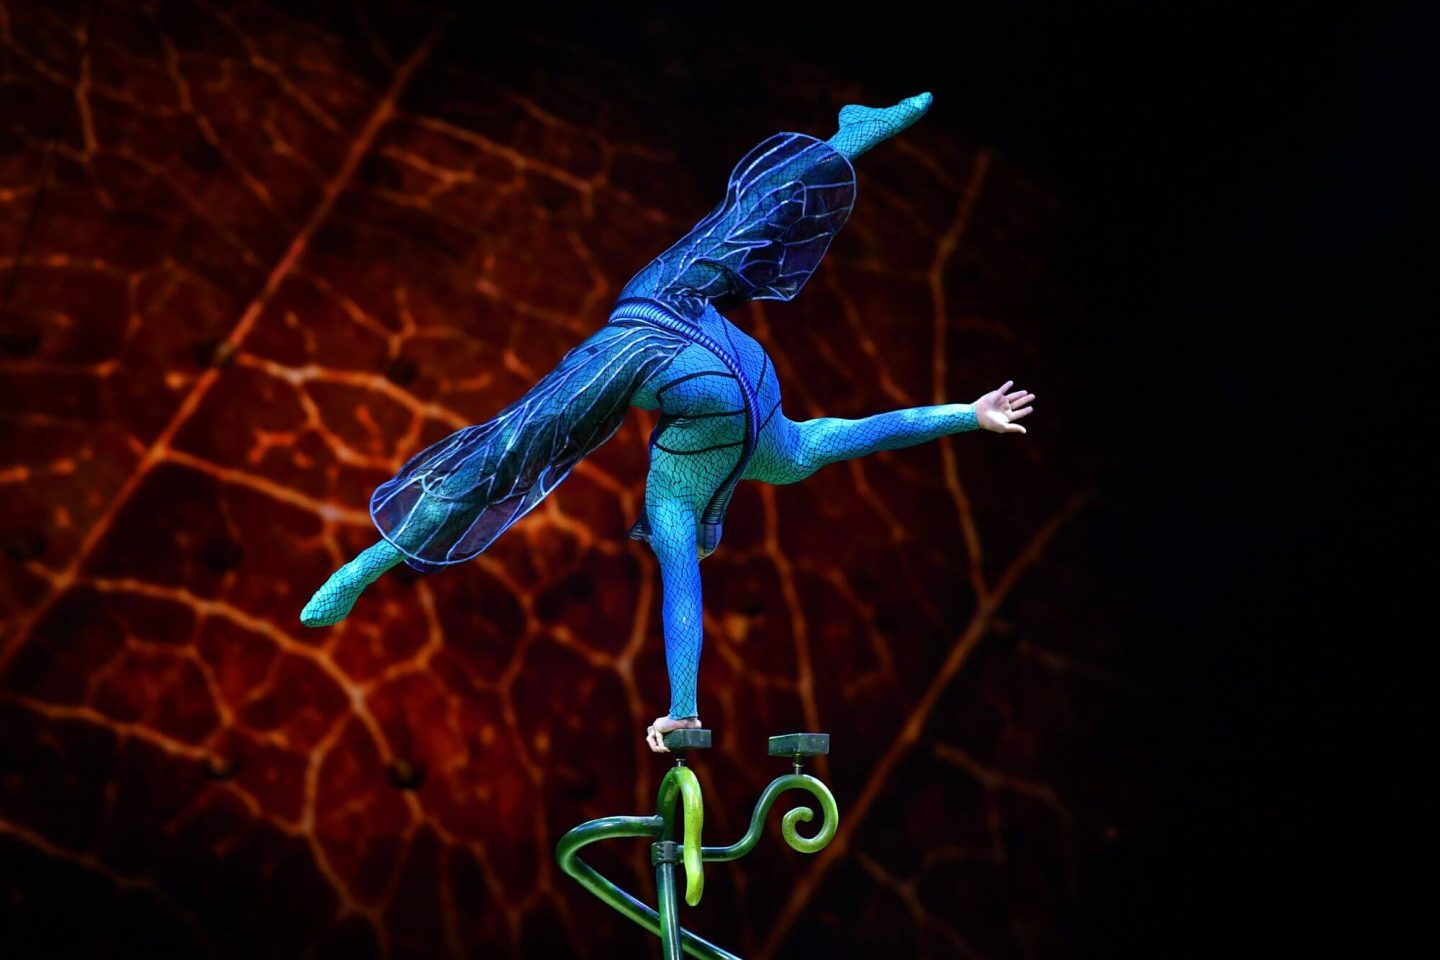 Ovo Cirque du Soleil performer balancing upside down on one hand dressed in blue